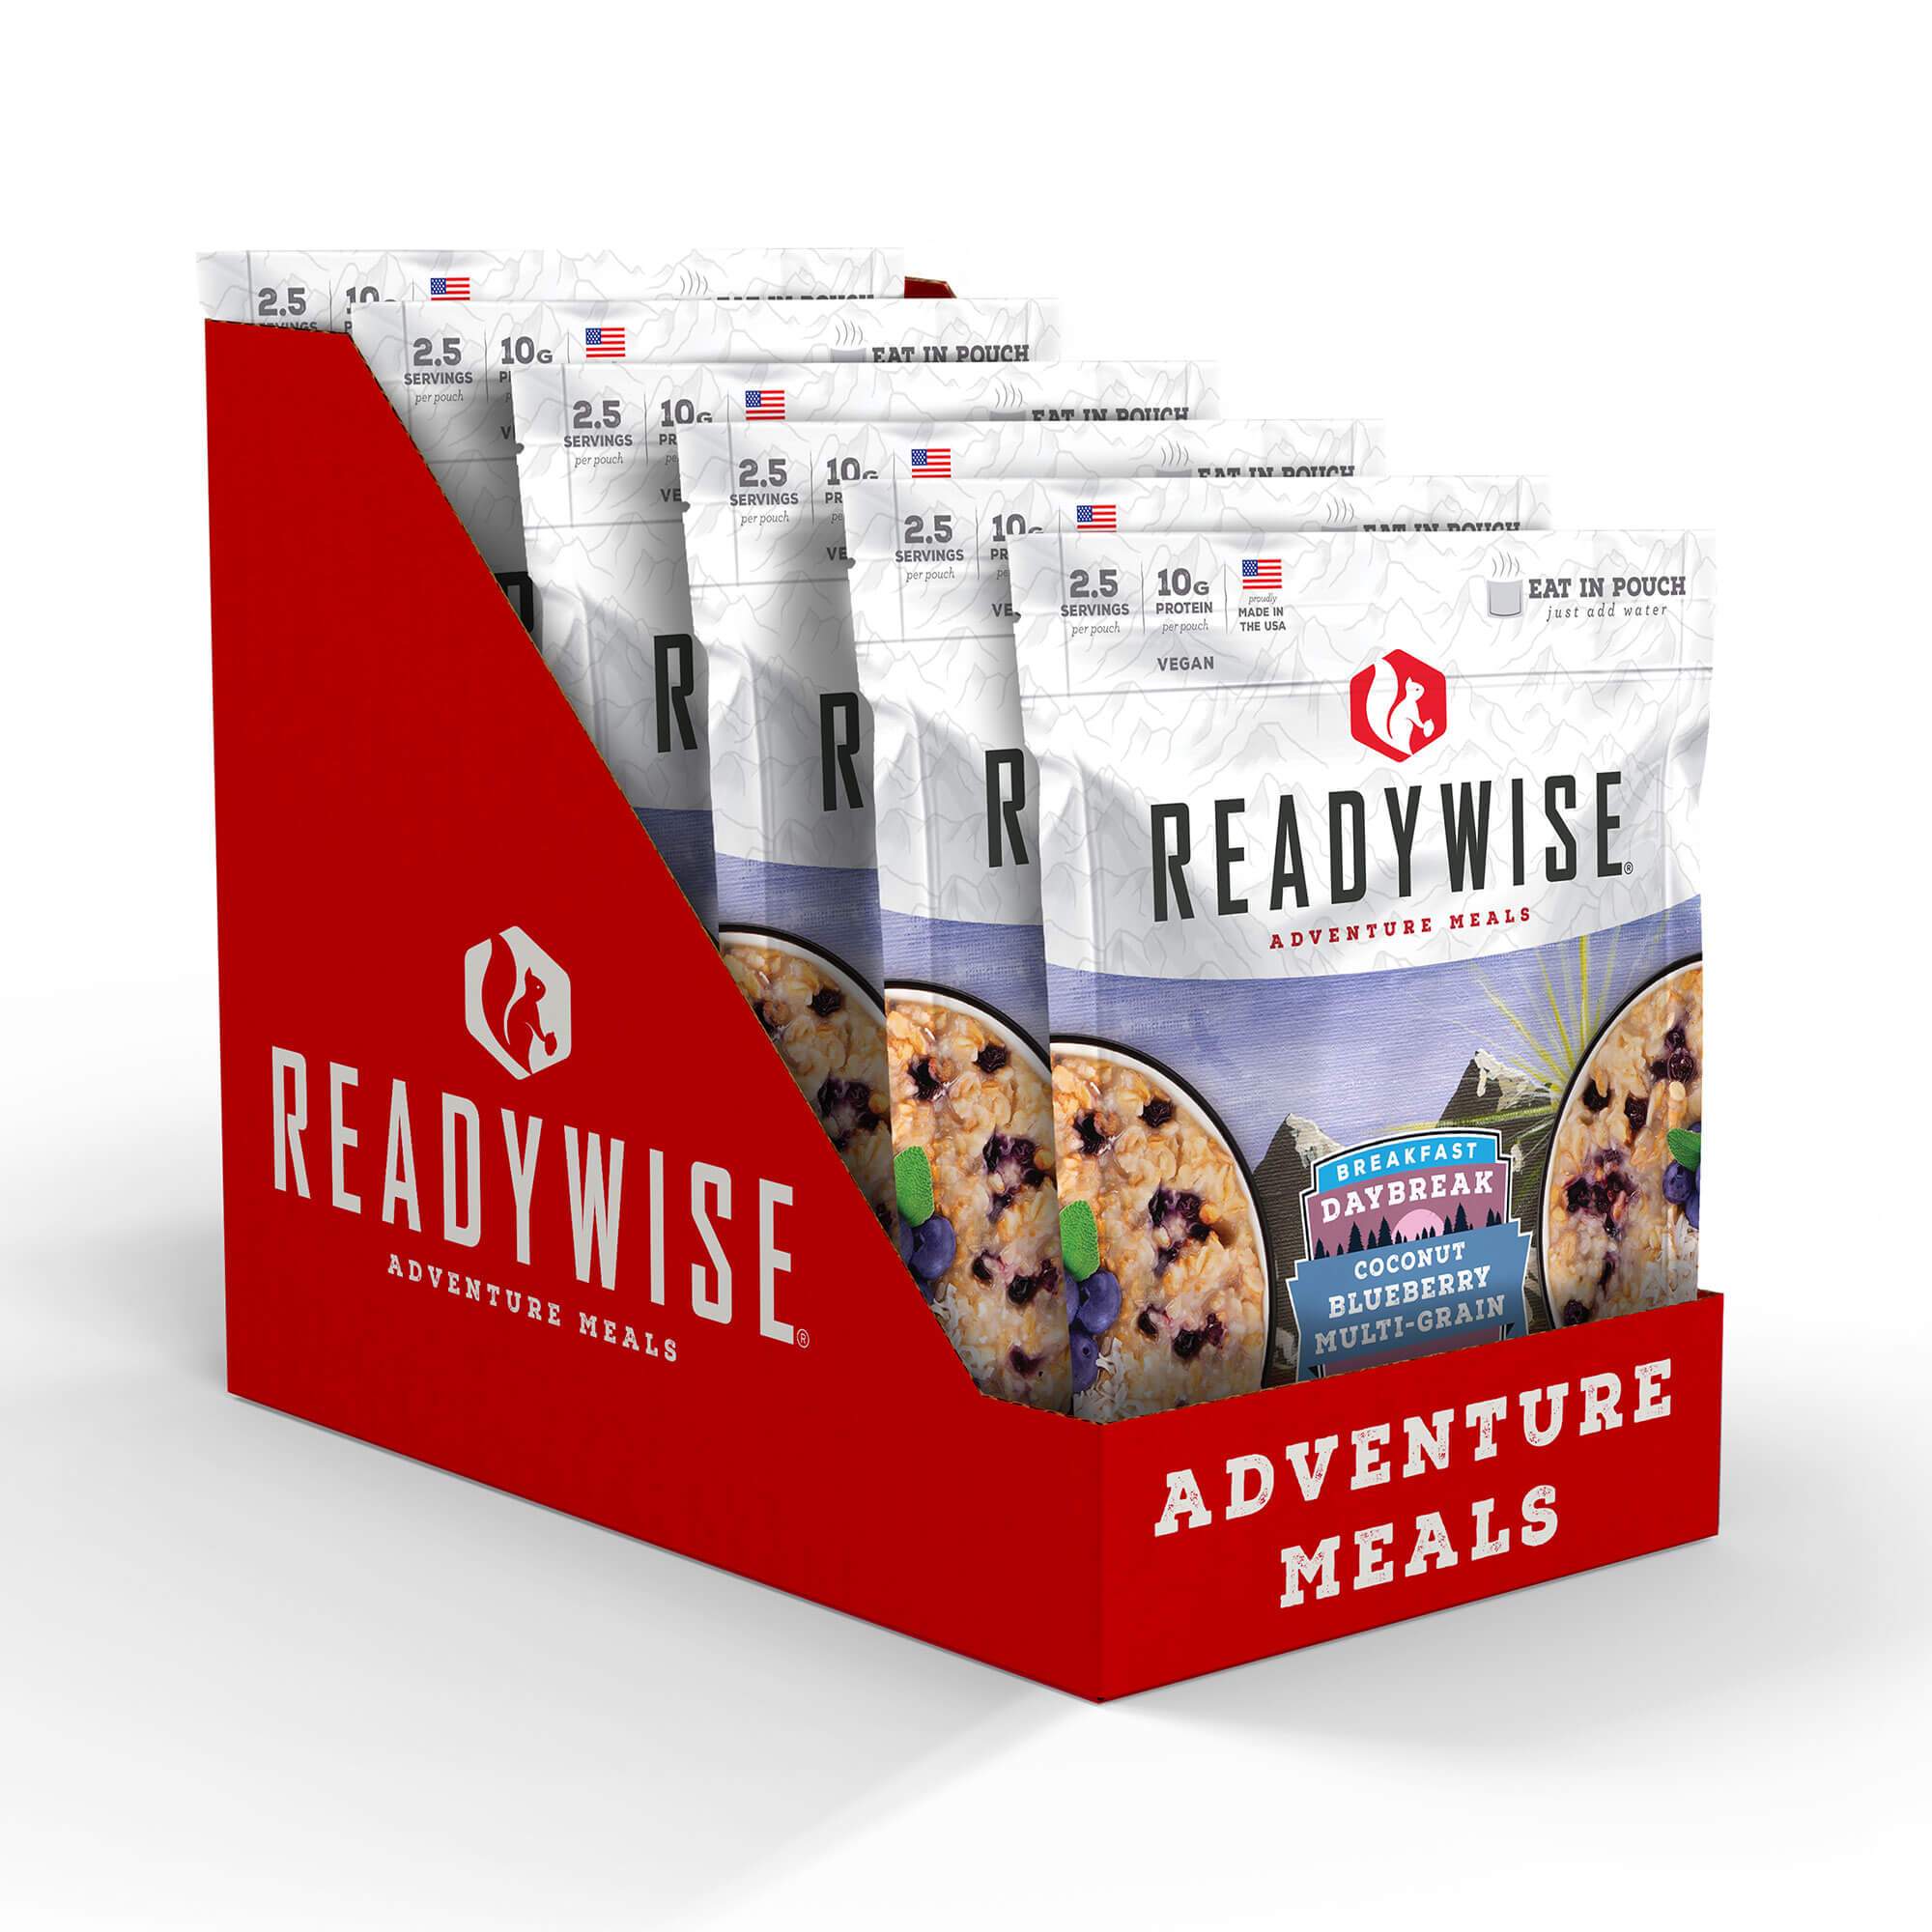 A box of ReadyWise (formerly Wise Food Storage) Daybreak Coconut Milk Blueberry Multi-Grain Cereal - 6 Pack - (SHIPS IN 1-2 WEEKS) adventure meals.